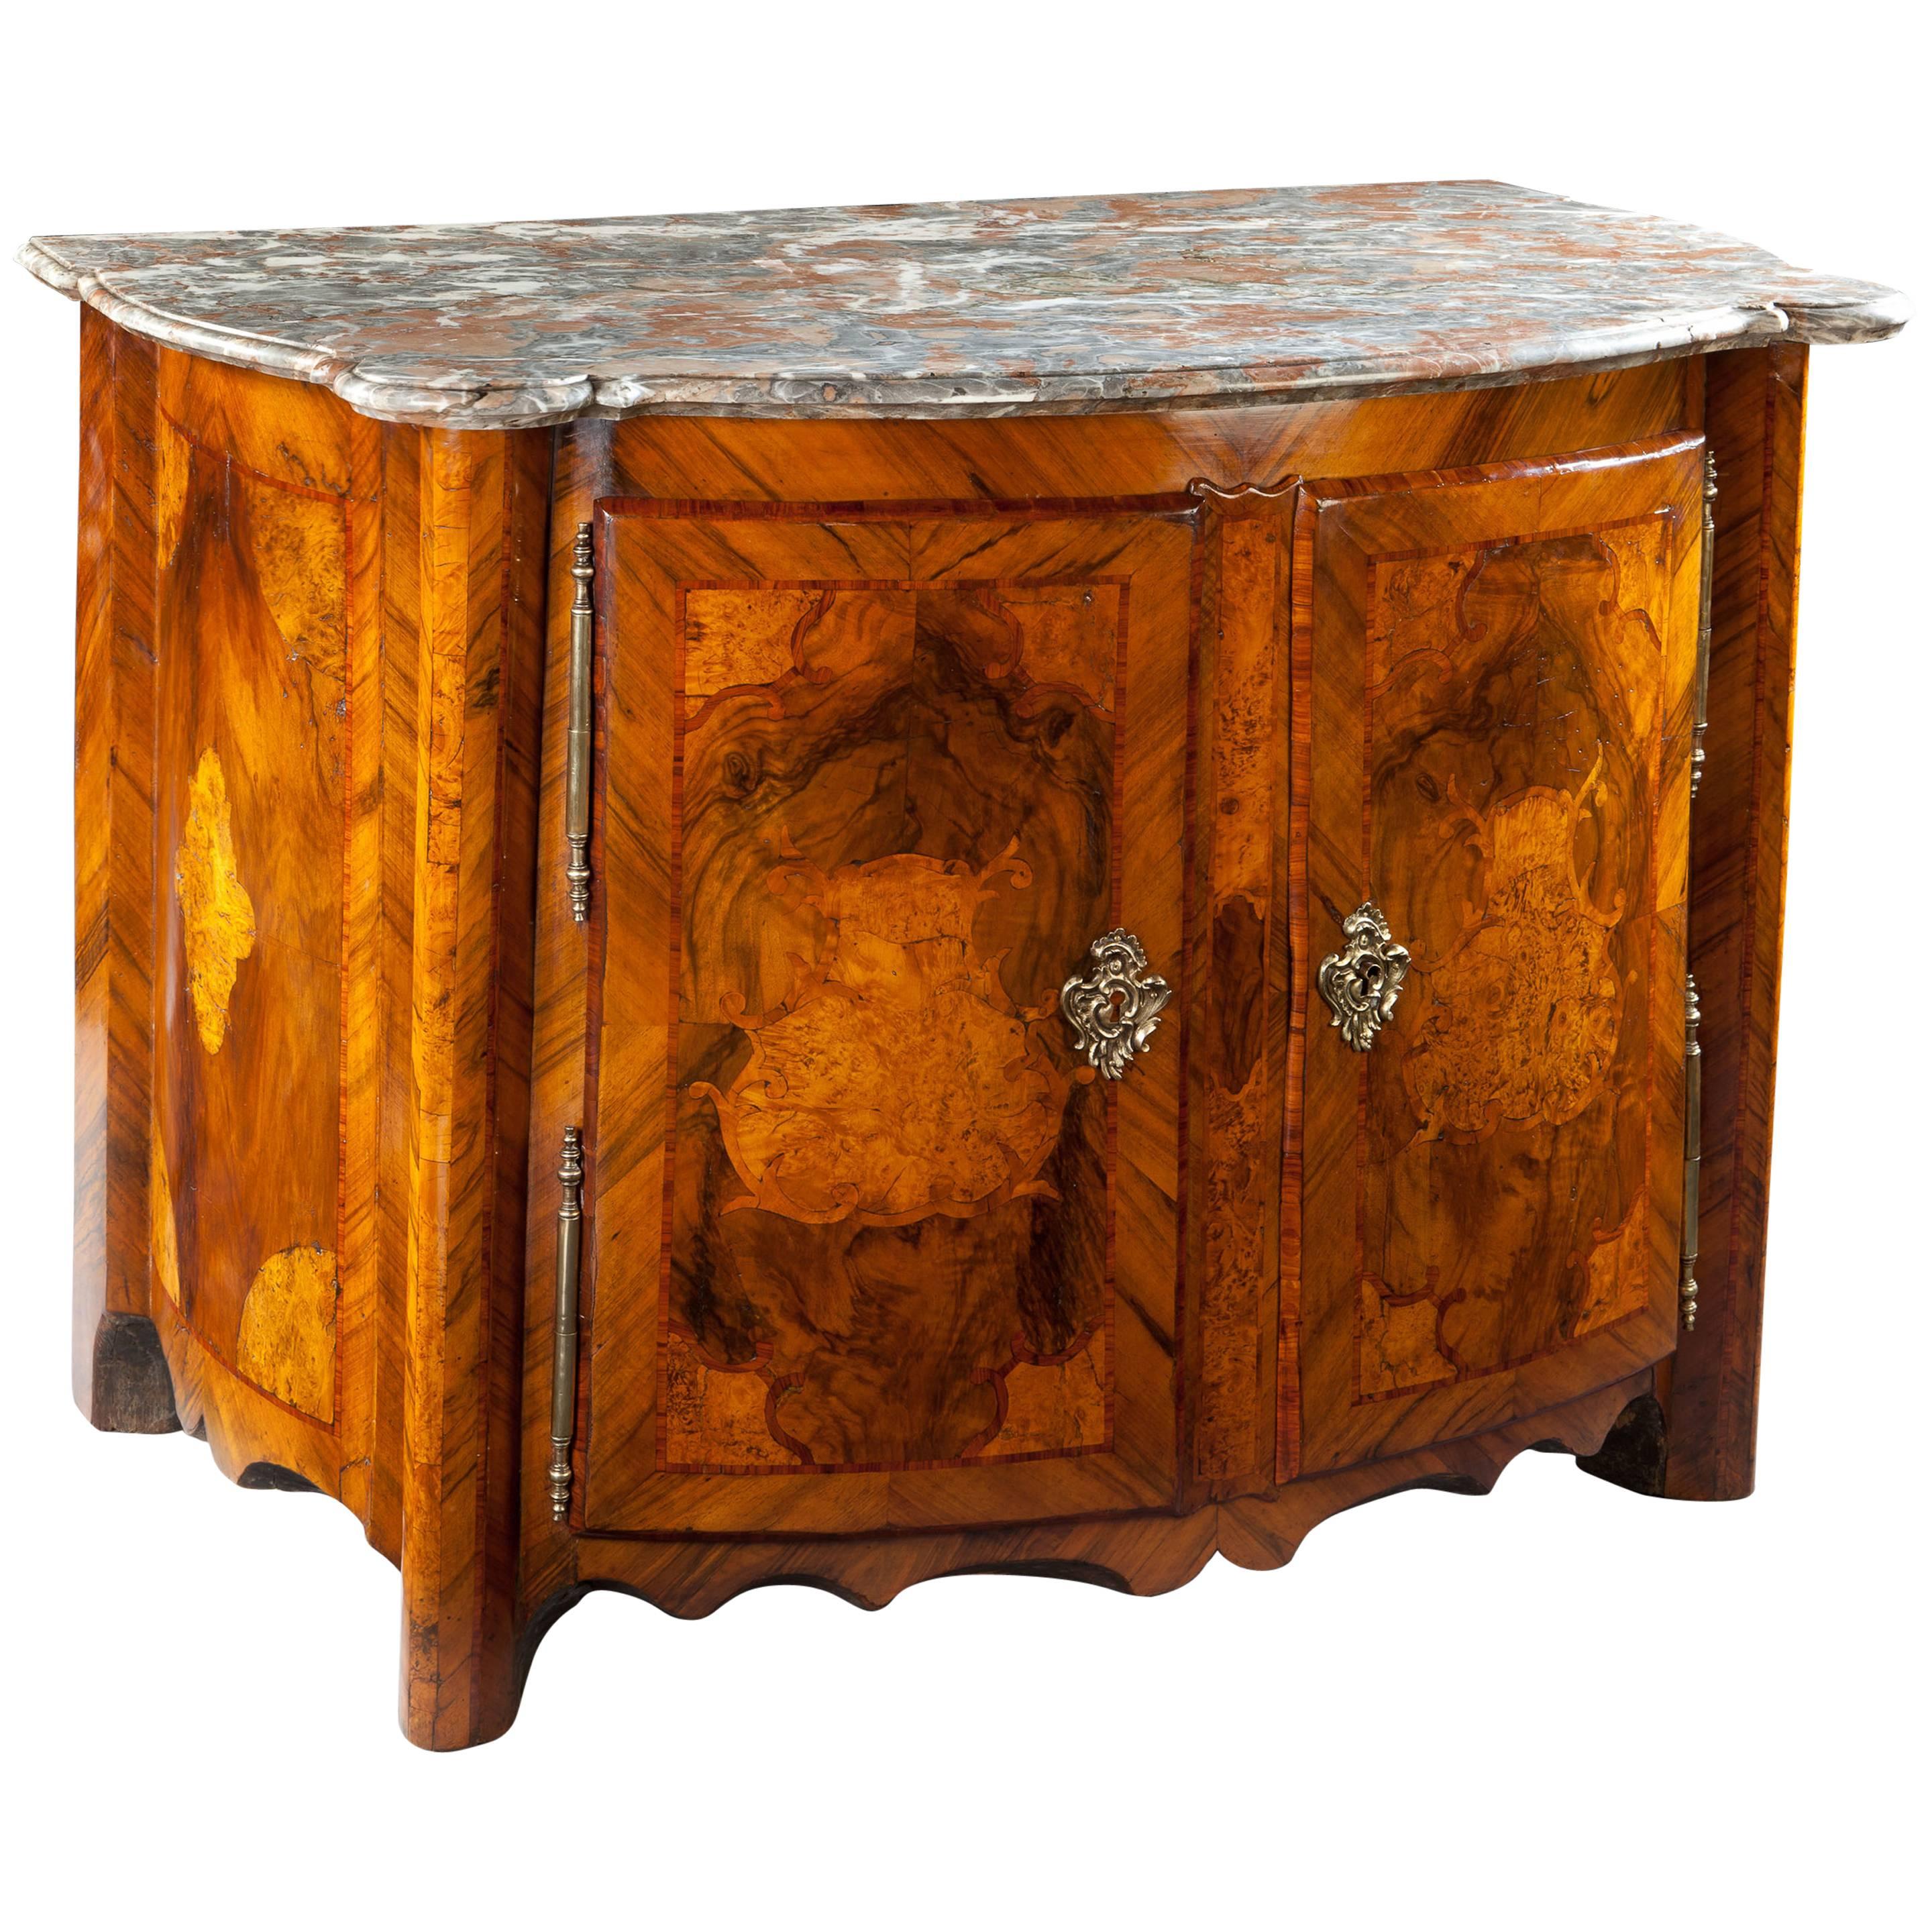 A wonderfully rich and decorative early 18th century marquetry buffet cabinet of generous proportions, veneered in highly figured timbers and retaining its original scalloped marble-top, the carcass of the cabinet is made of oak and reveals the